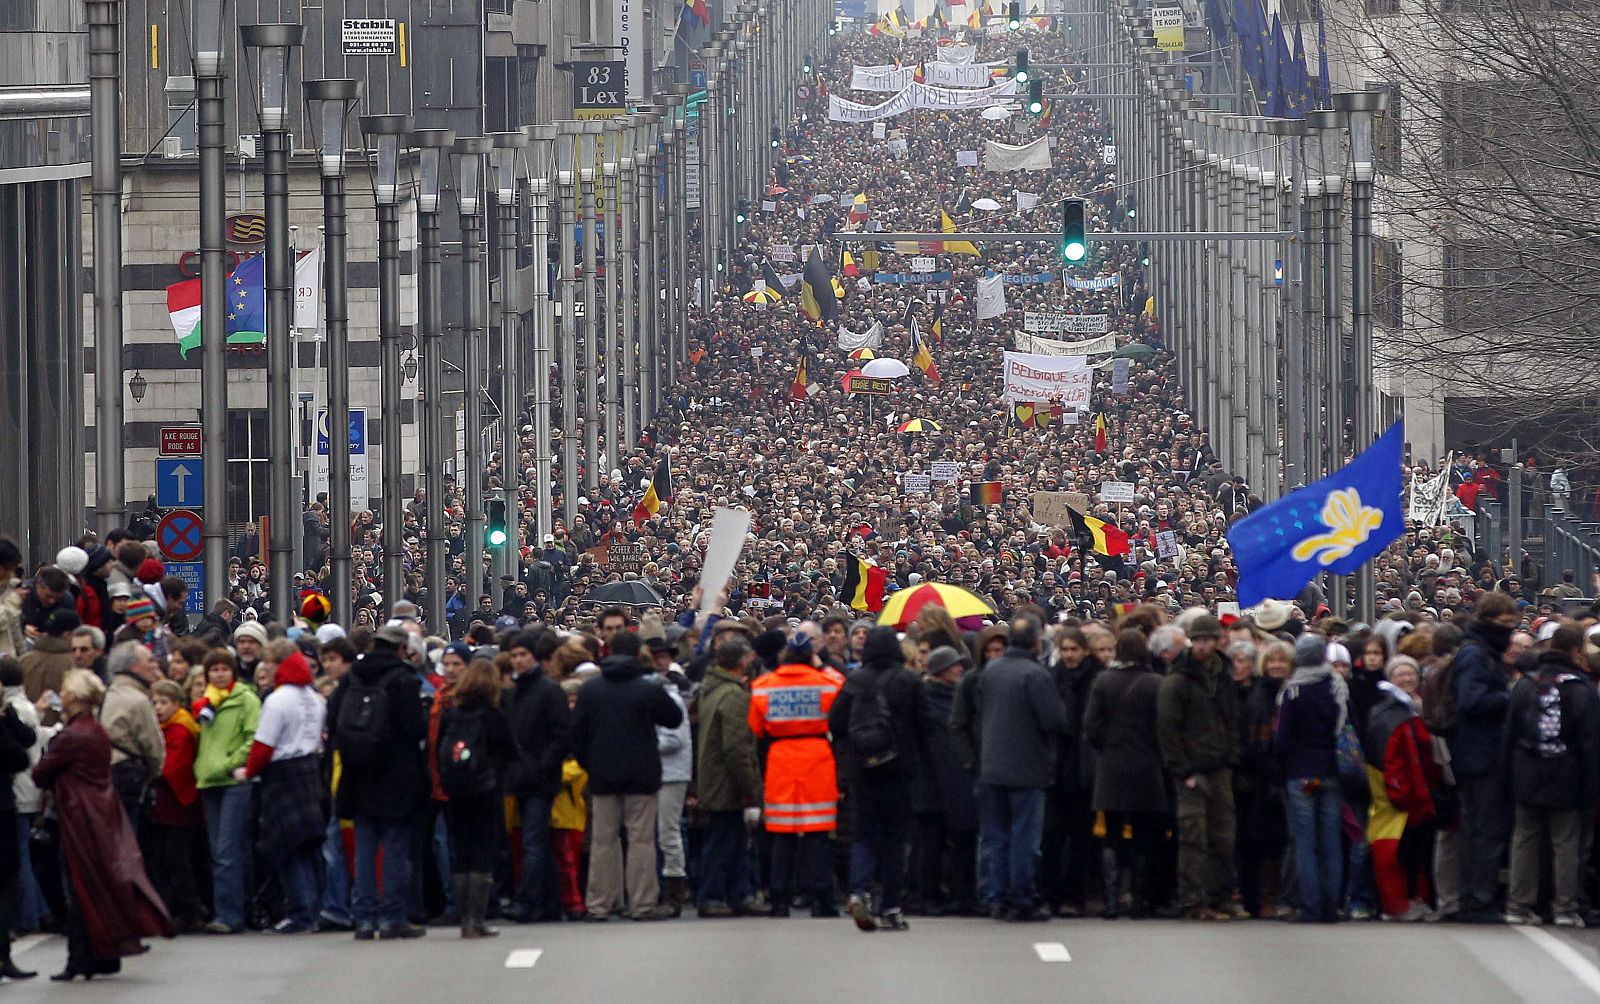 Belgian citizens take part in a rally calling for the establishment of a government more than 200 days after elections, in Brussels